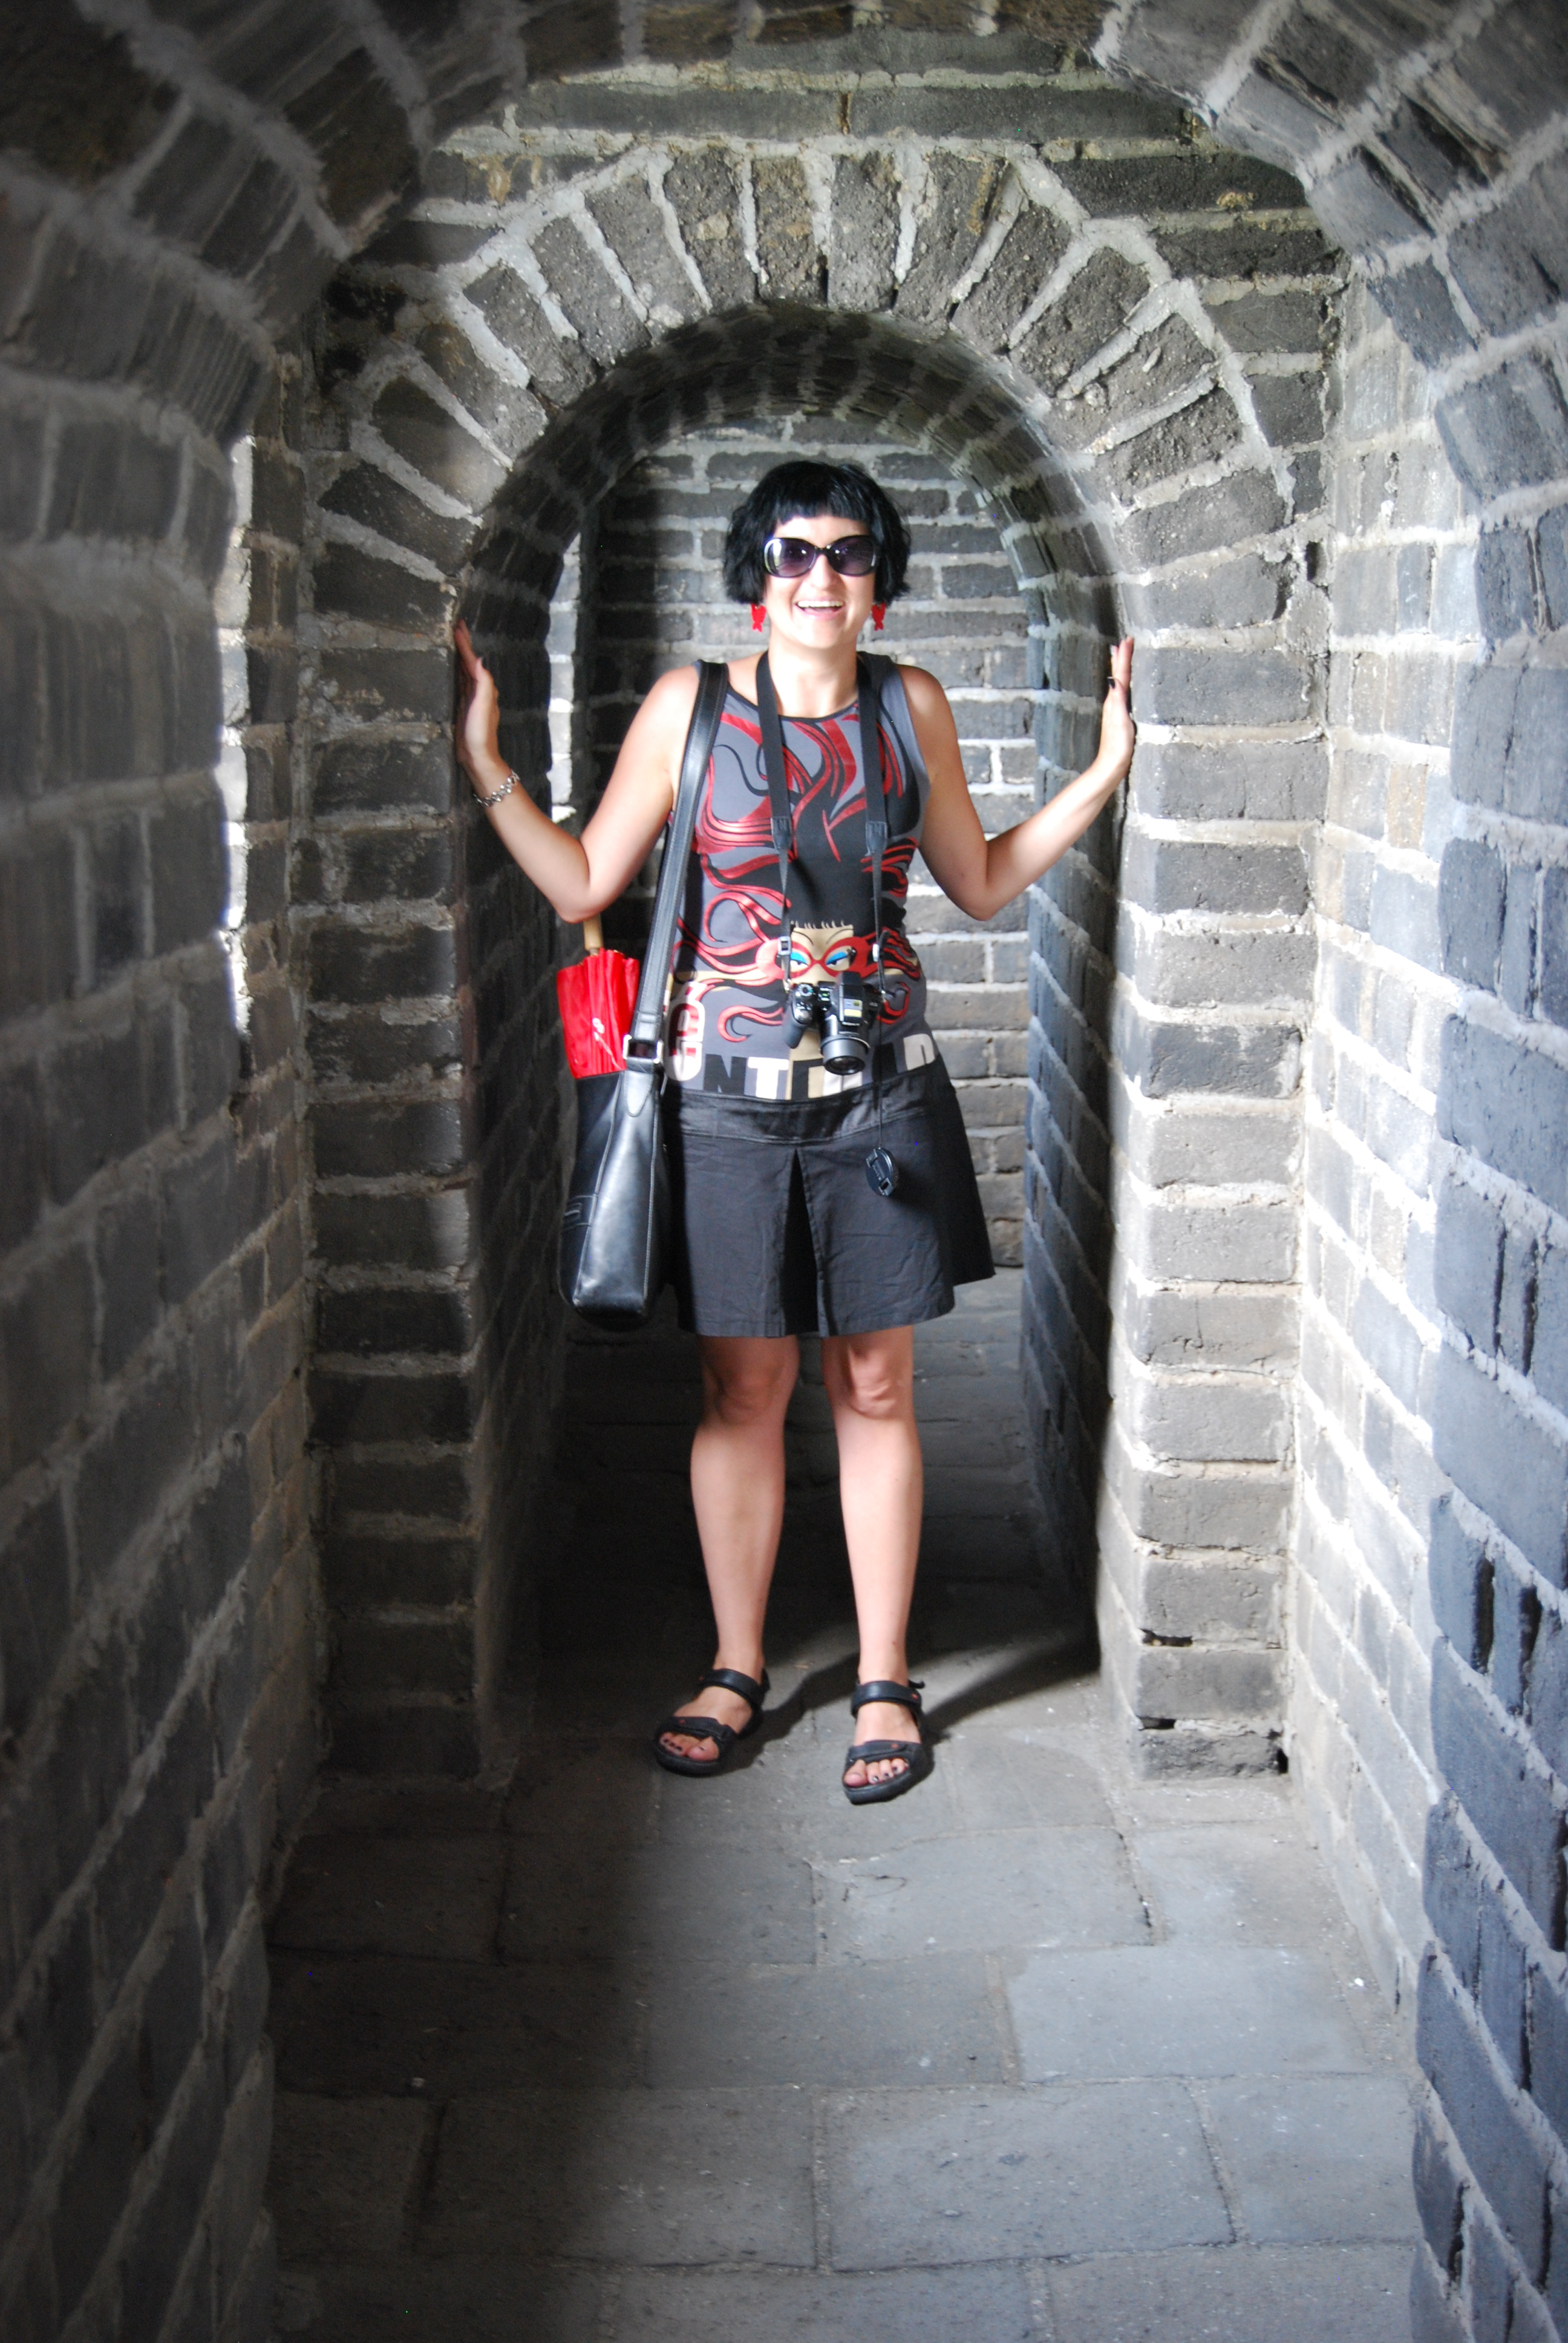 On The Great Wall of China